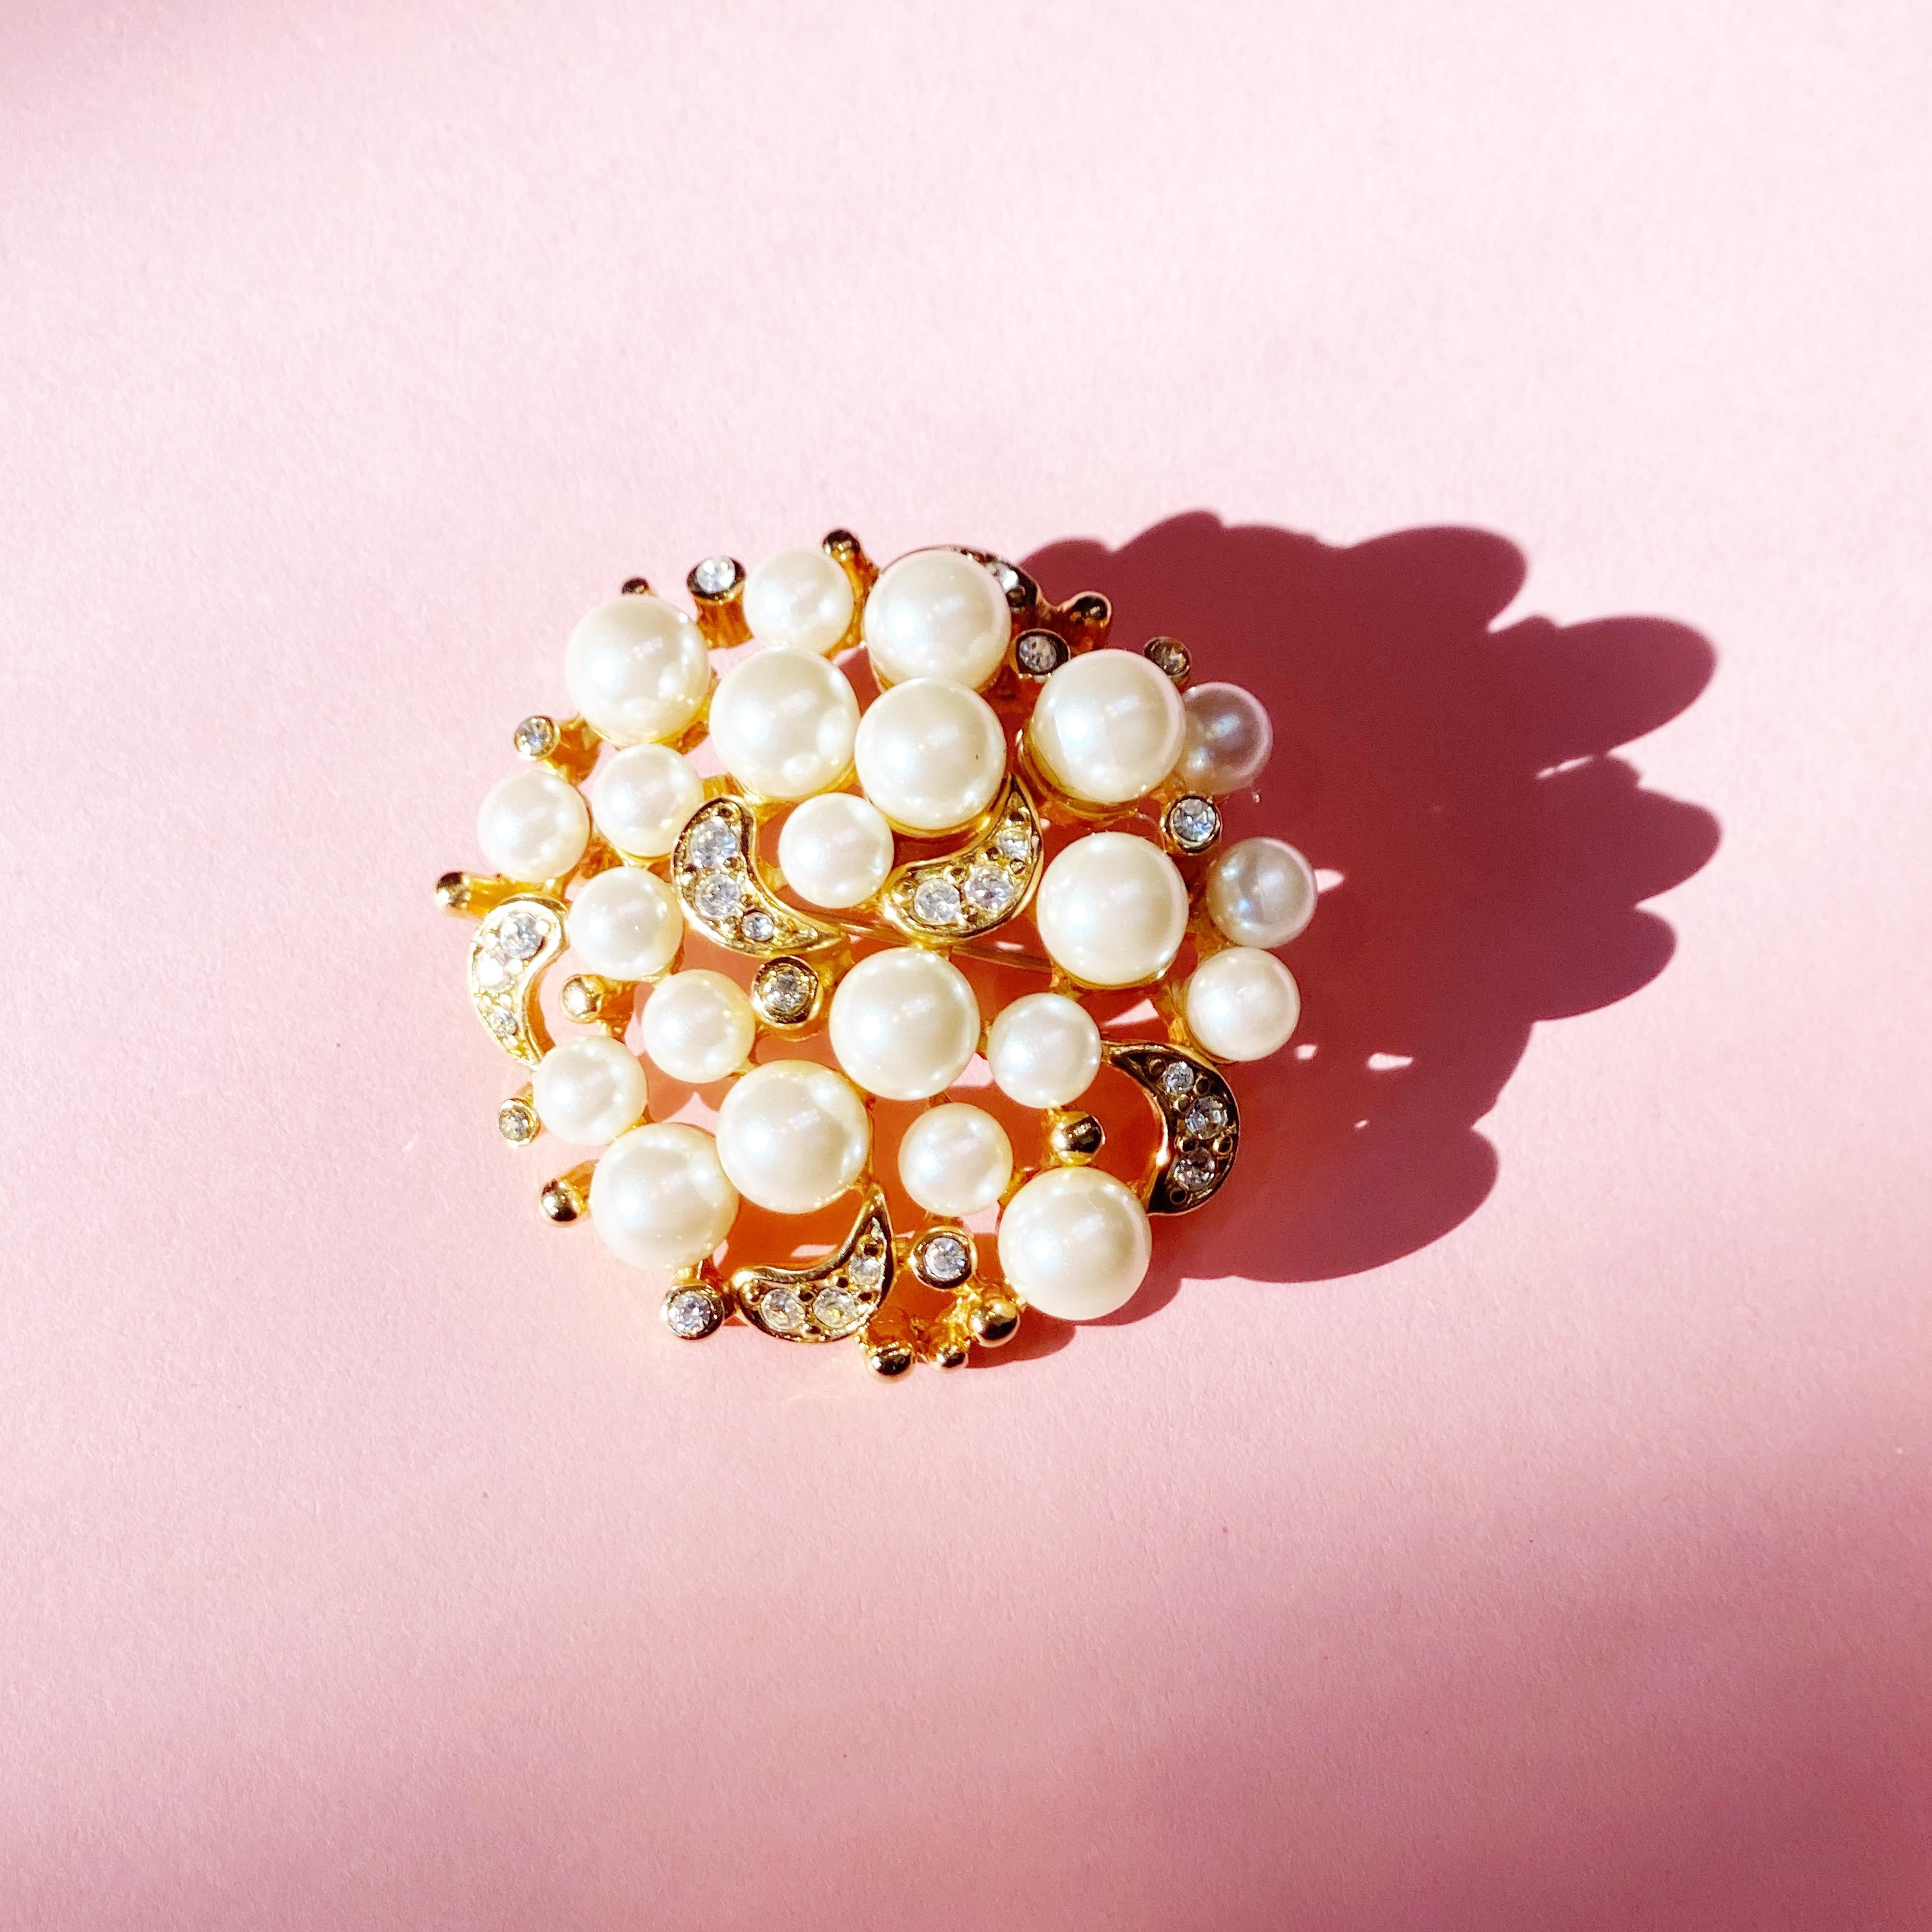 Women's Vintage Gilt Pearl Cluster Brooch with Crystal Rhinestones by Erwin Pearl, 1980s